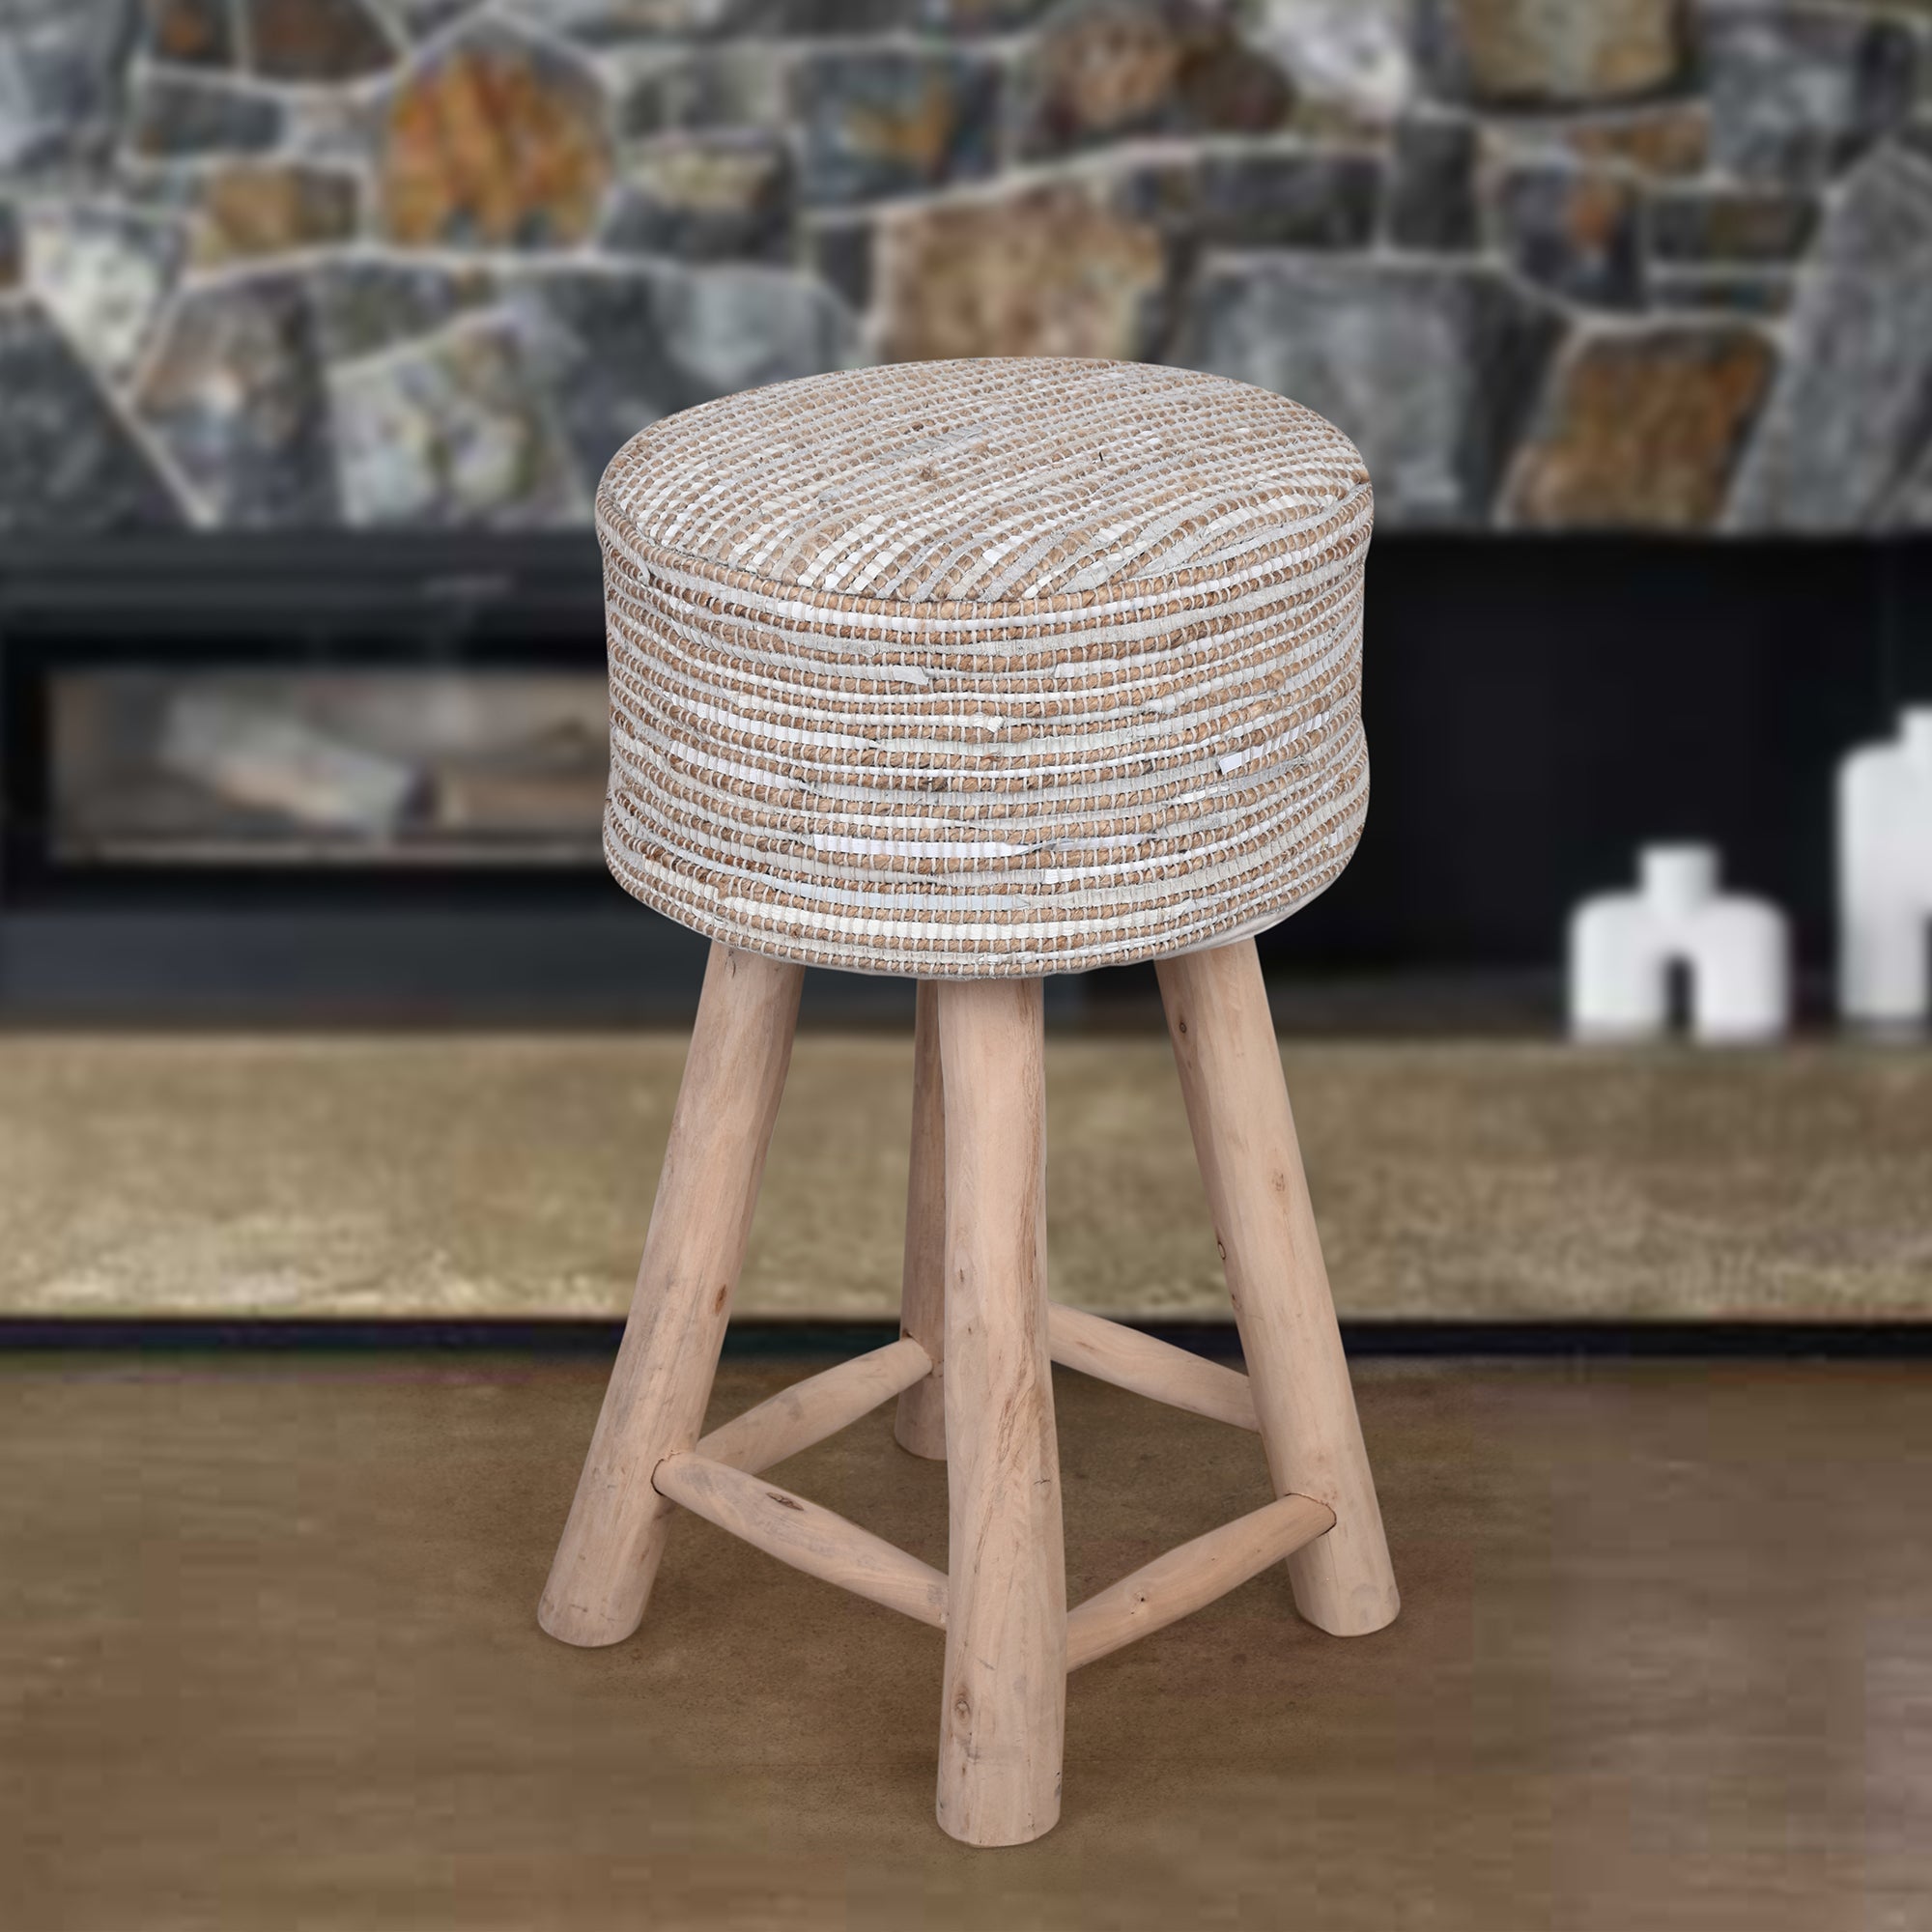 SPICA BAR STOOL - JUTE/ LEATHER